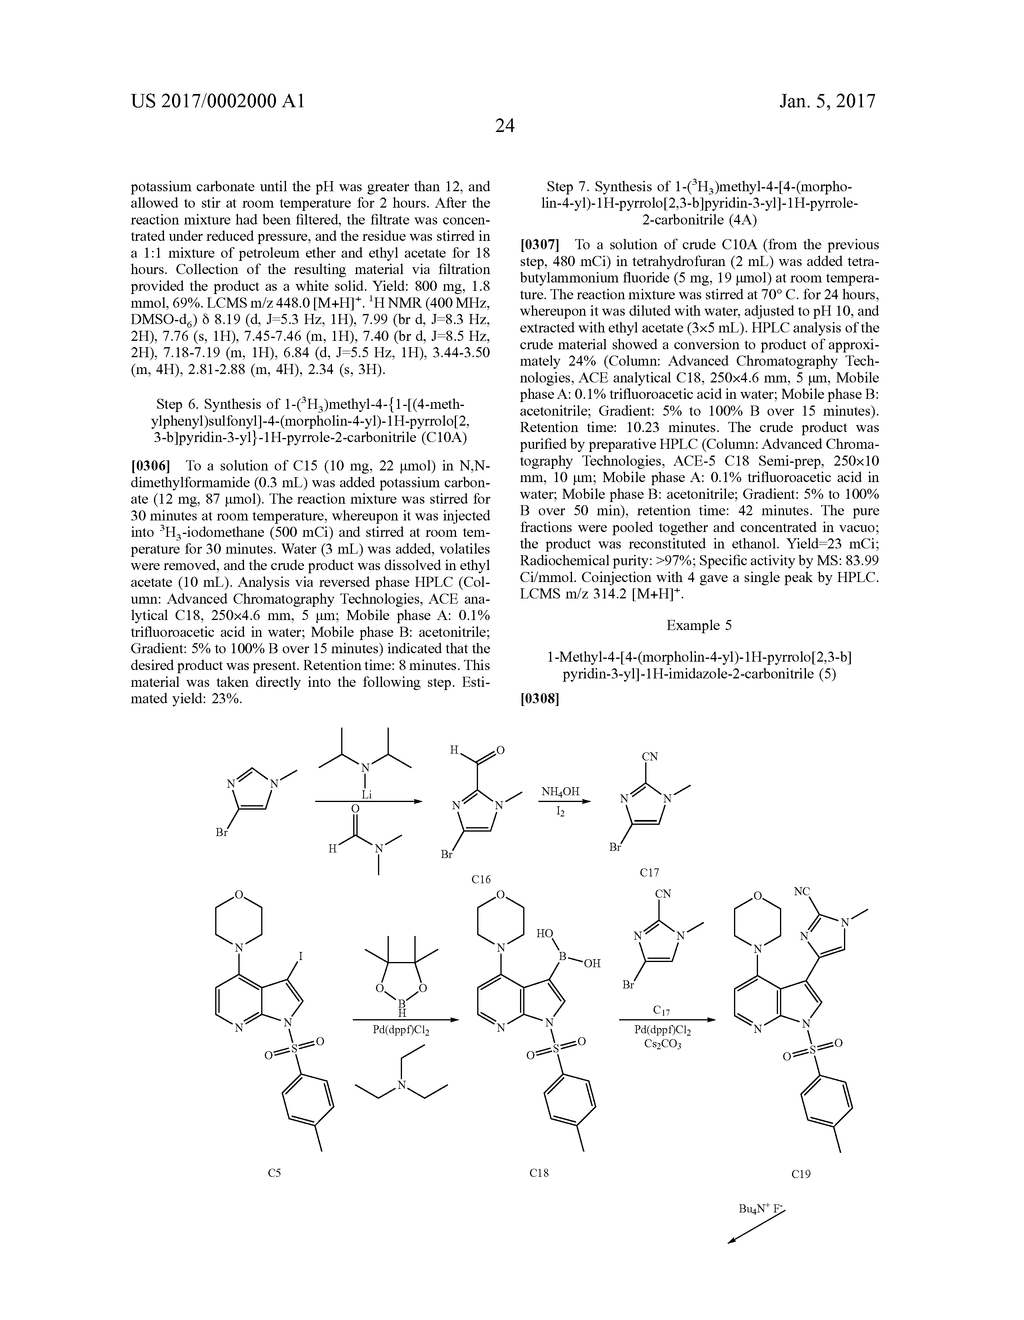 NOVEL 3,4-DISUBSTITUTED-1H-PYRROLO[2,3-b]PYRIDINES AND     4,5-DISUBSTITUTED-7H-PYRROLO[2,3-c]PYRIDAZINES AS LRRK2 INHIBITORS - diagram, schematic, and image 25